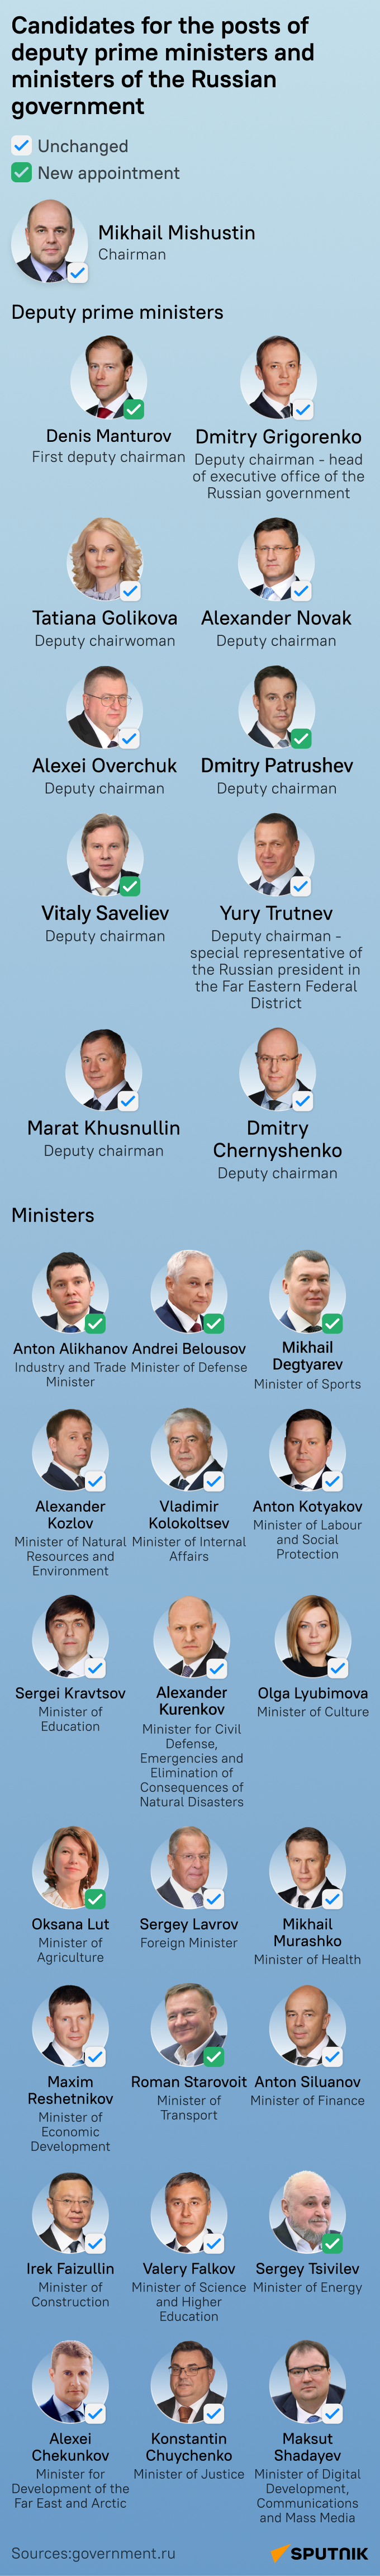 Who is Who in Moscow: Likely Makeup of New Russian Government MOB - Sputnik Africa